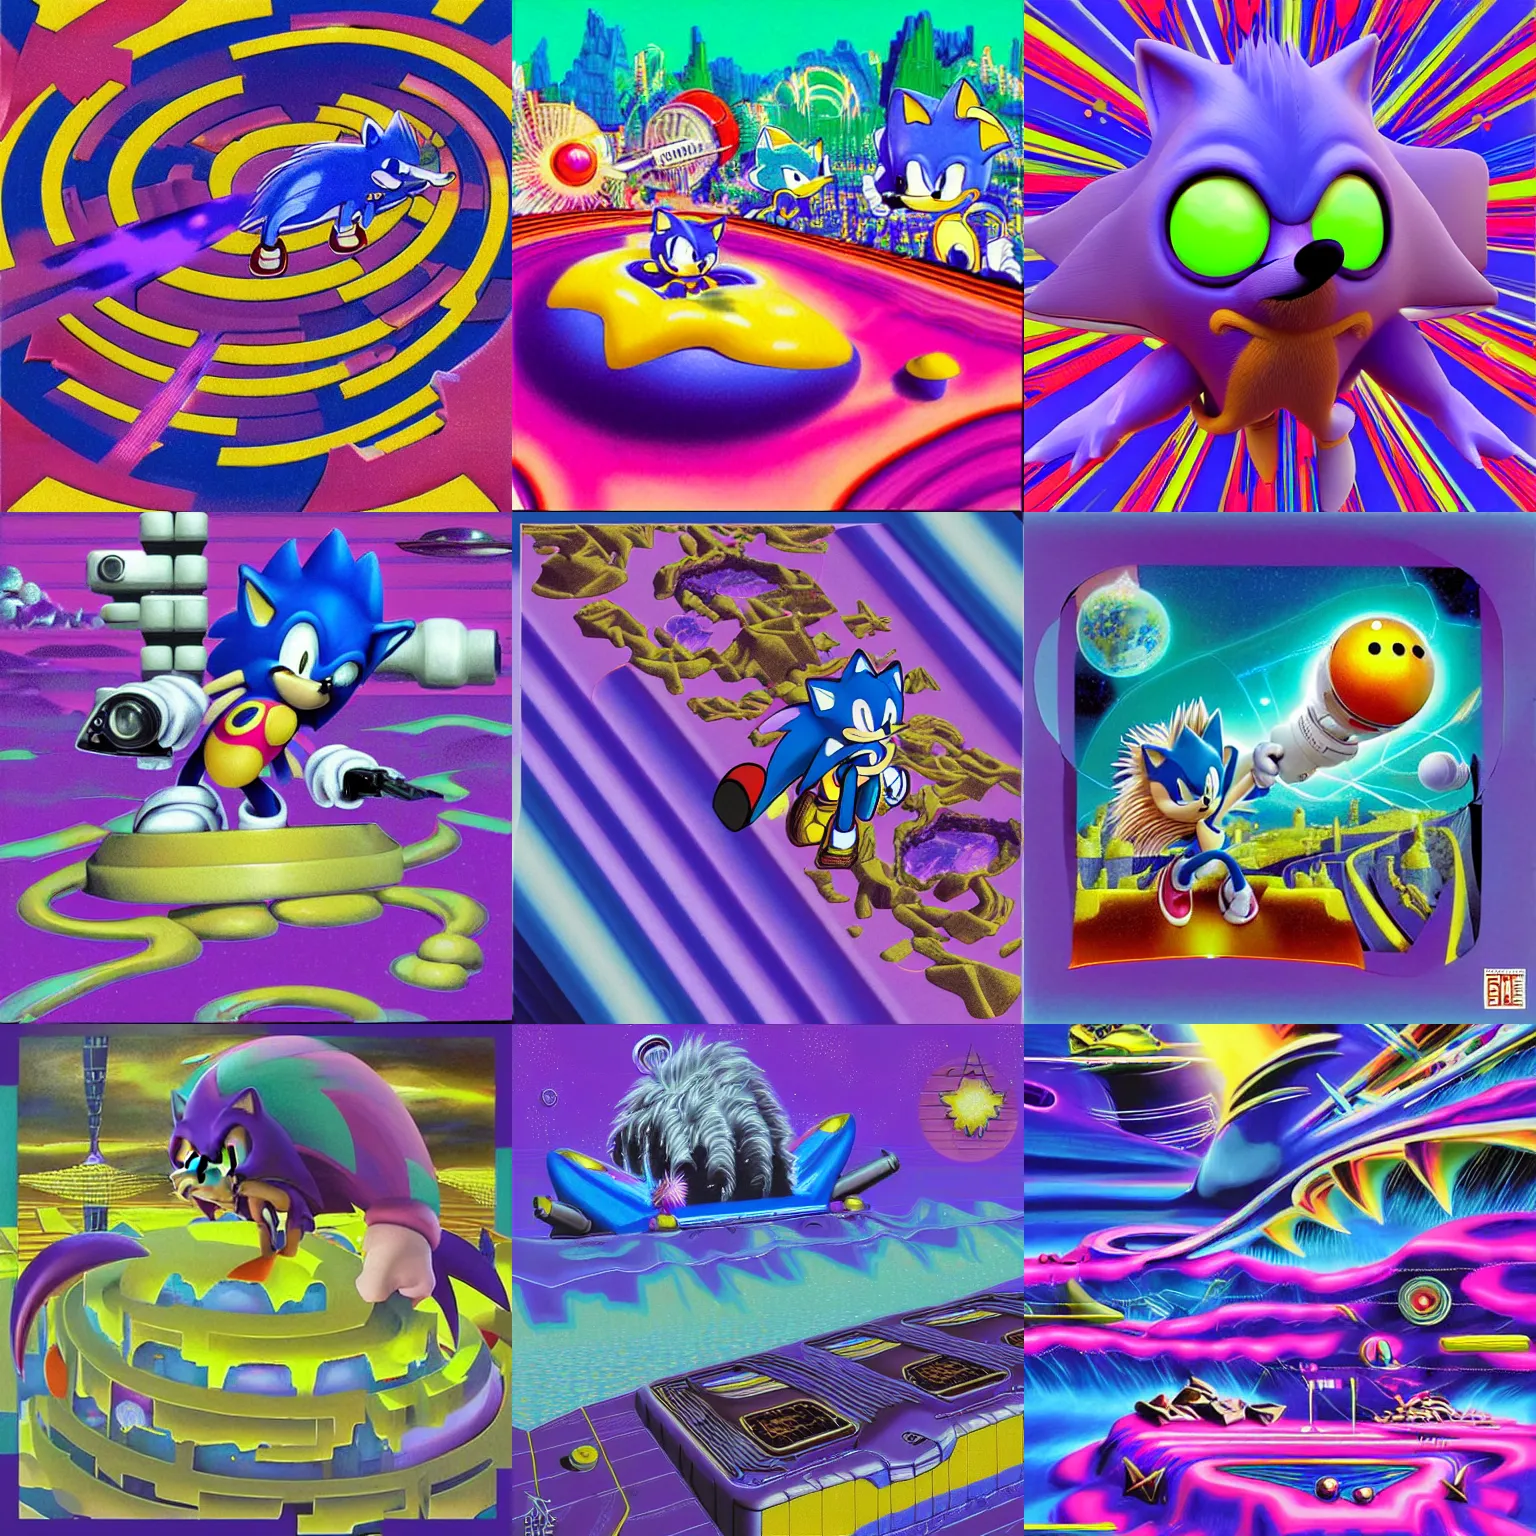 Prompt: dreaming of closeup sonic hedgehog portrait deconstructivist claymation scifi matte painting landscape of a surreal stars, retro moulded professional soft pastels high quality airbrush art album cover of a liquid dissolving airbrush art lsd sonic the hedgehog swimming through cyberspace purple teal checkerboard background 1 9 8 0 s 1 9 8 2 sega genesis video game album cover